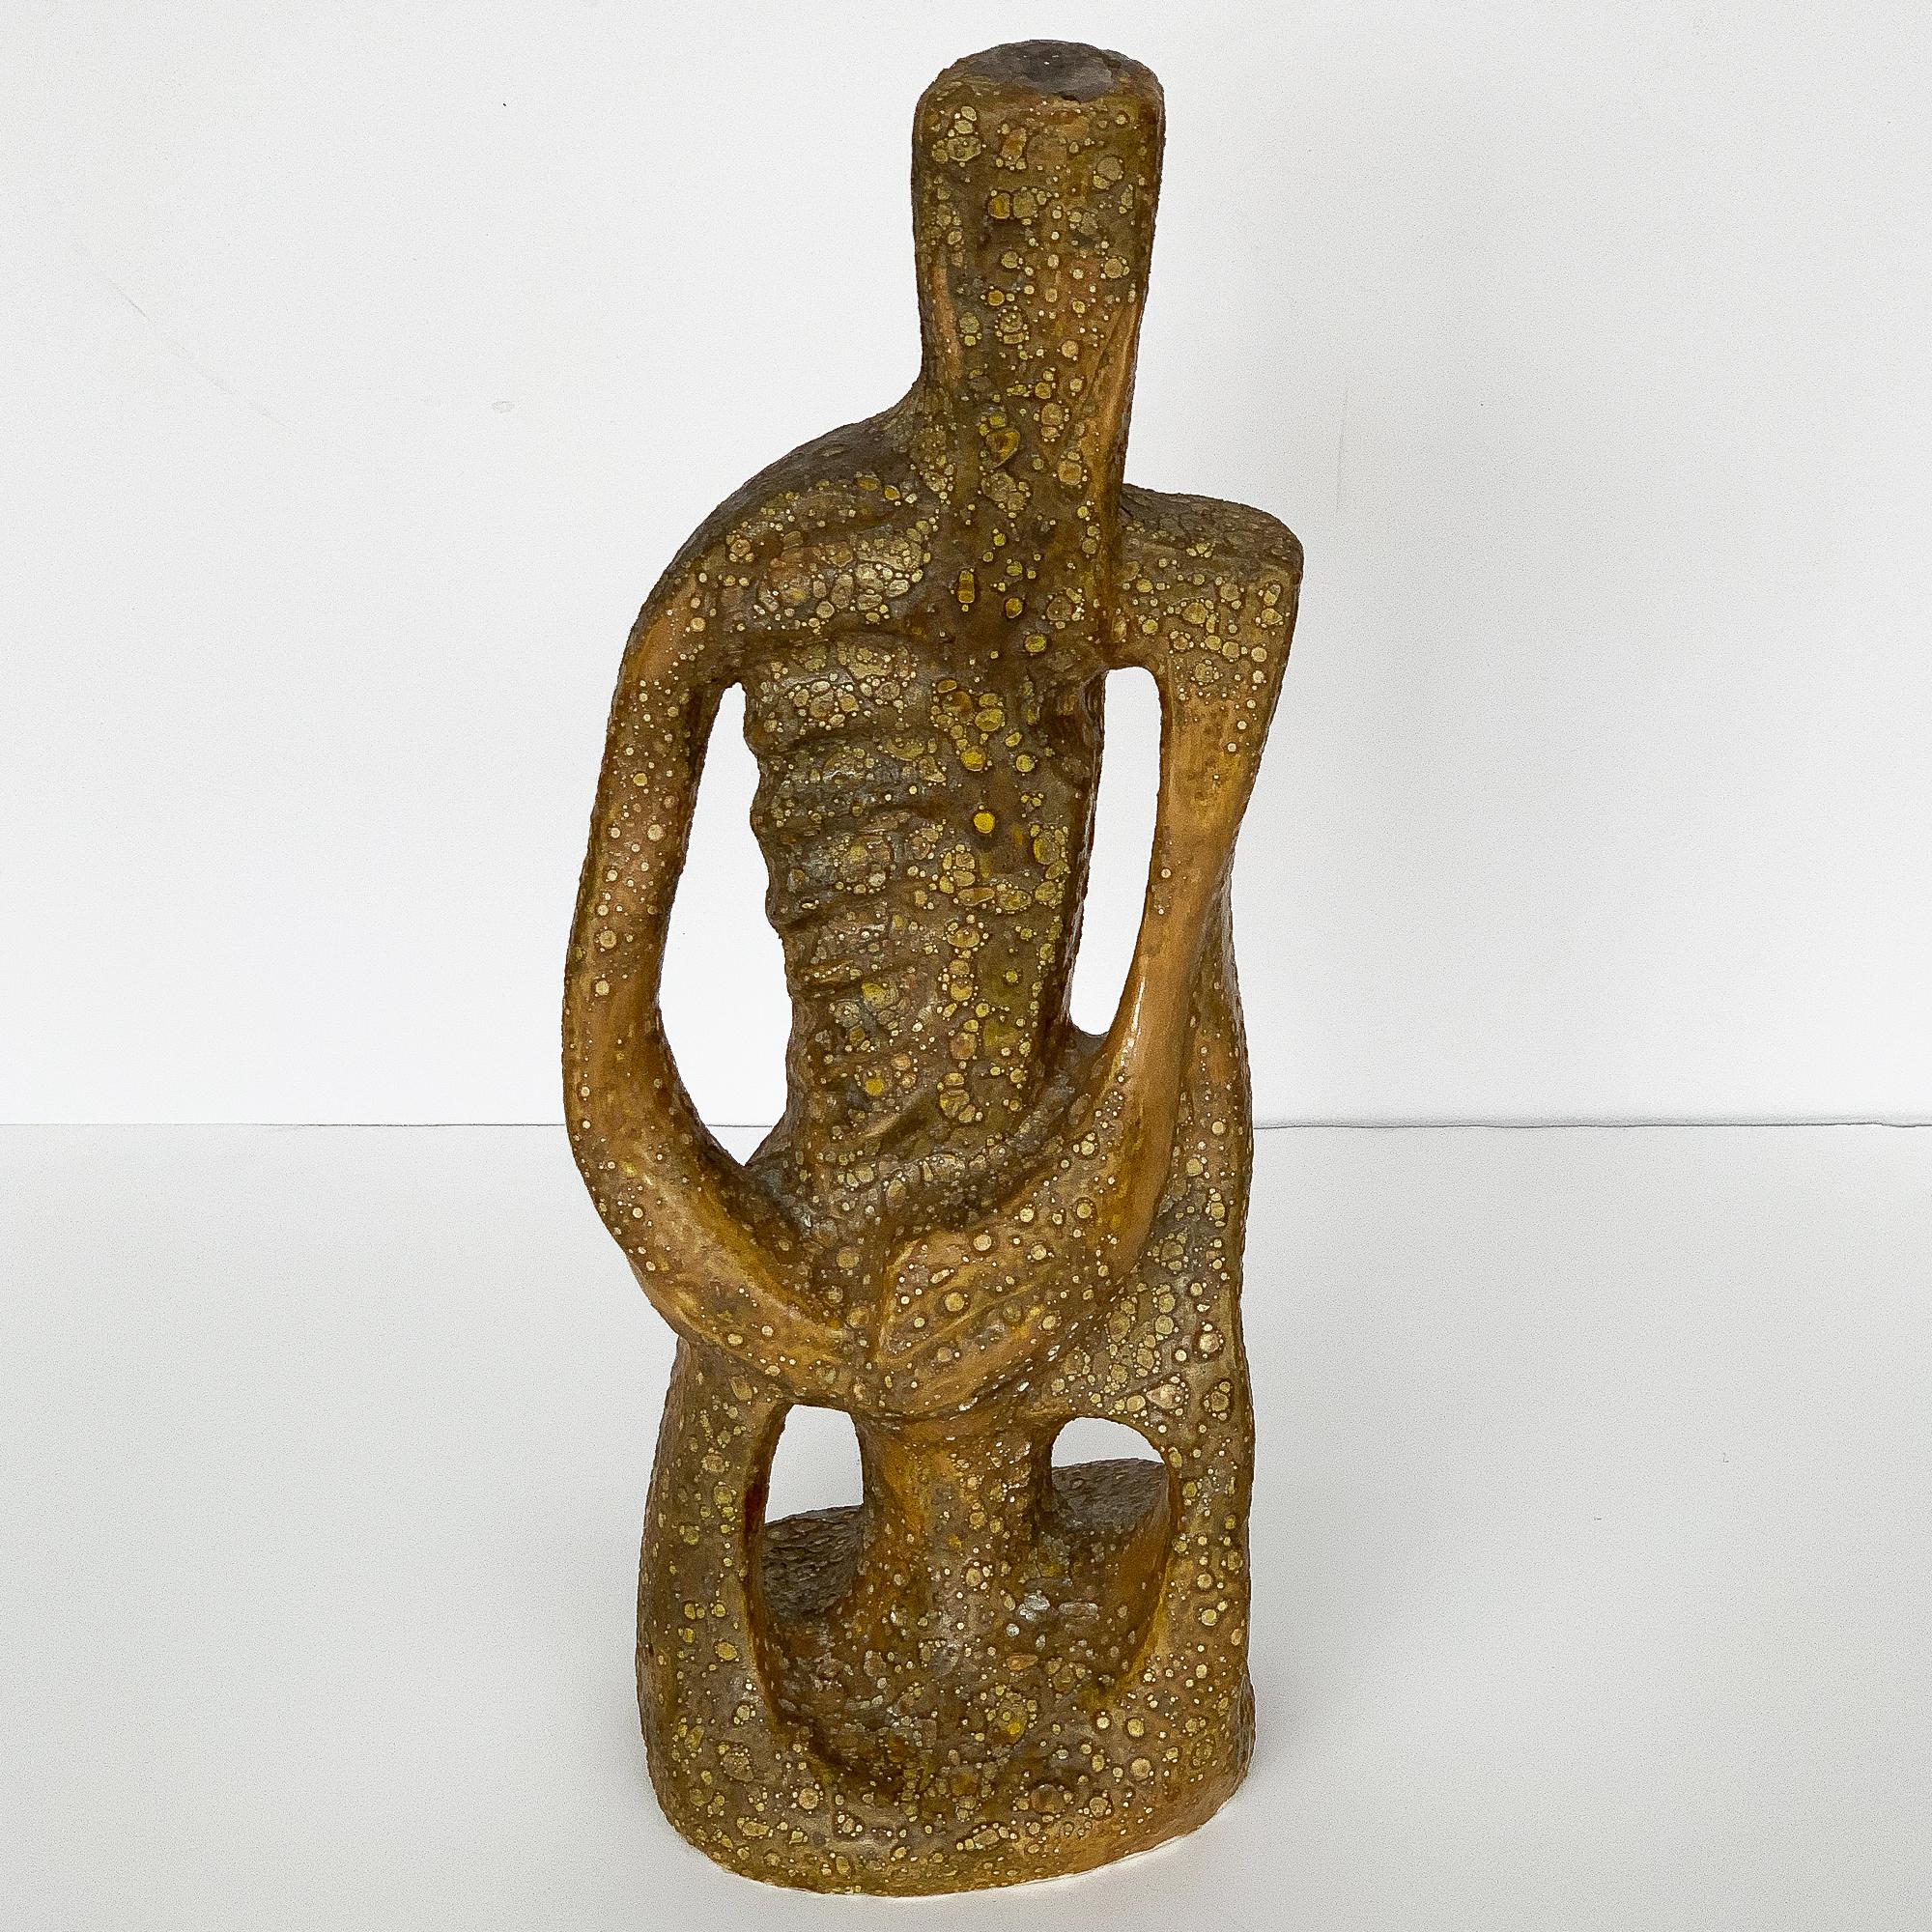 A figurative male abstract ceramic sculpture with a highly textured lava glaze. Glaze is an ocre and light brown color. Signed and dated 1961. Unknown artist and signature possibly reading 